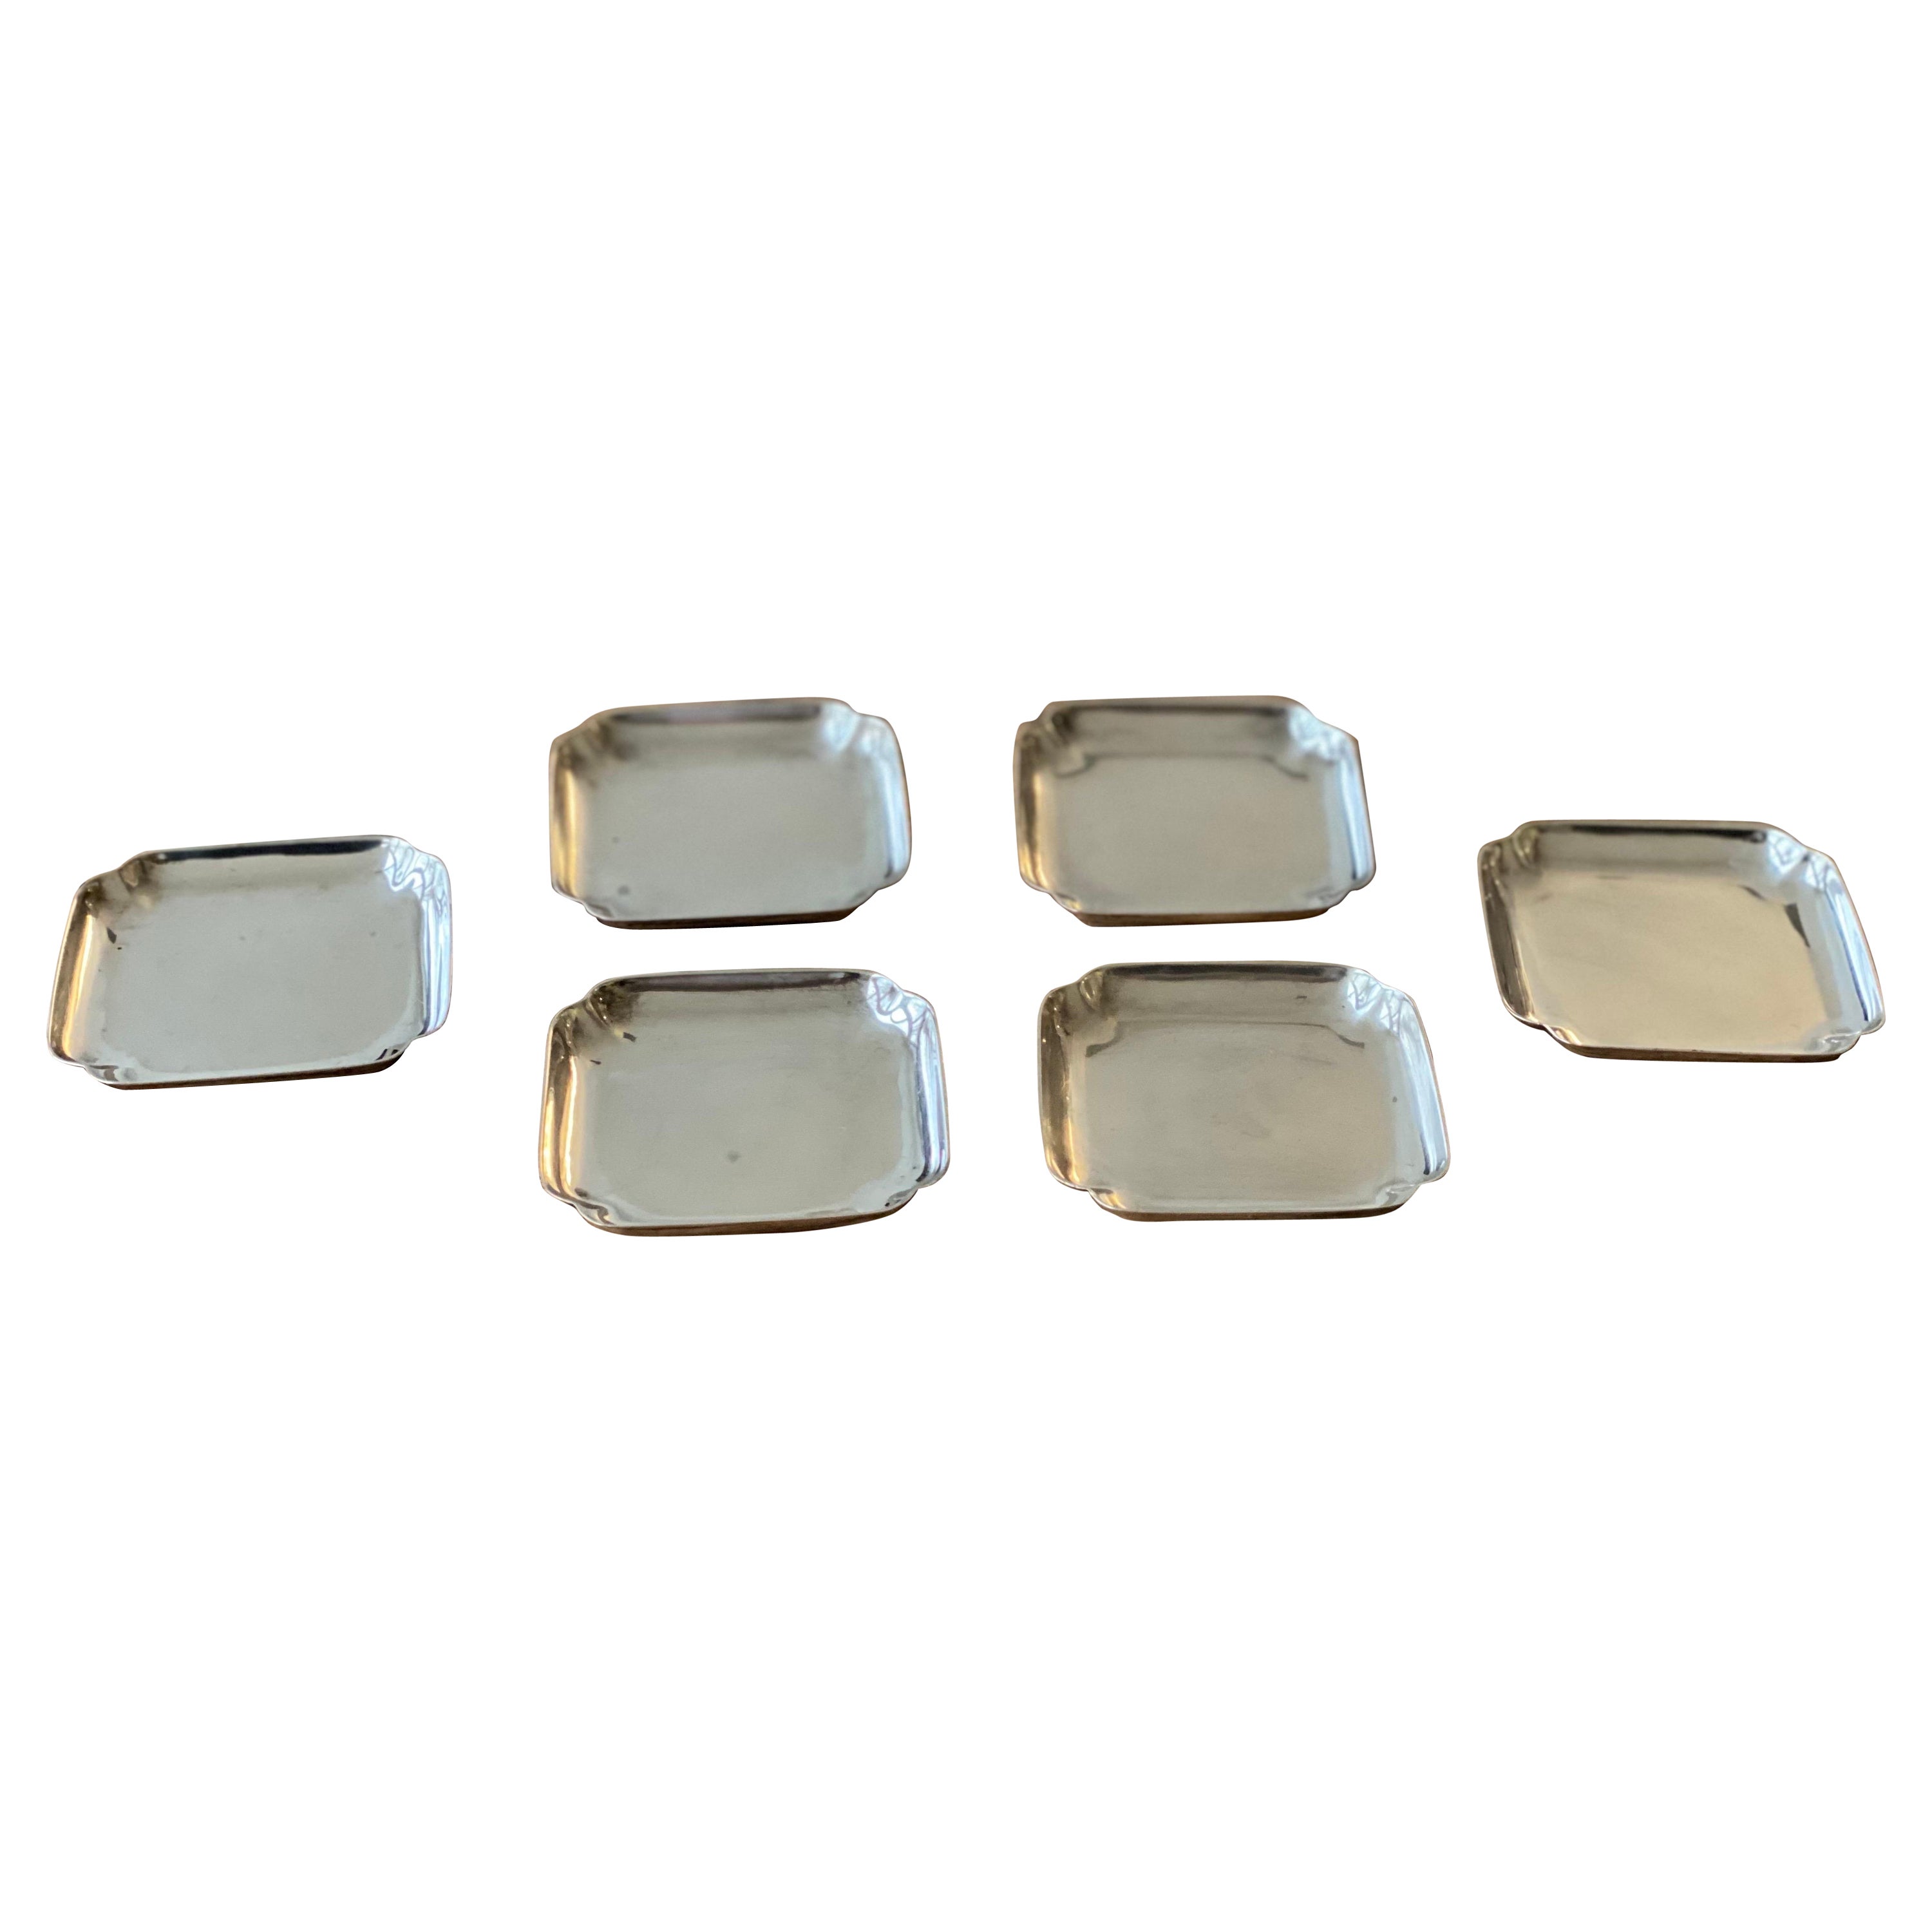 Cartier Sterling Silver Nut/Butter Pat Plates, Marked